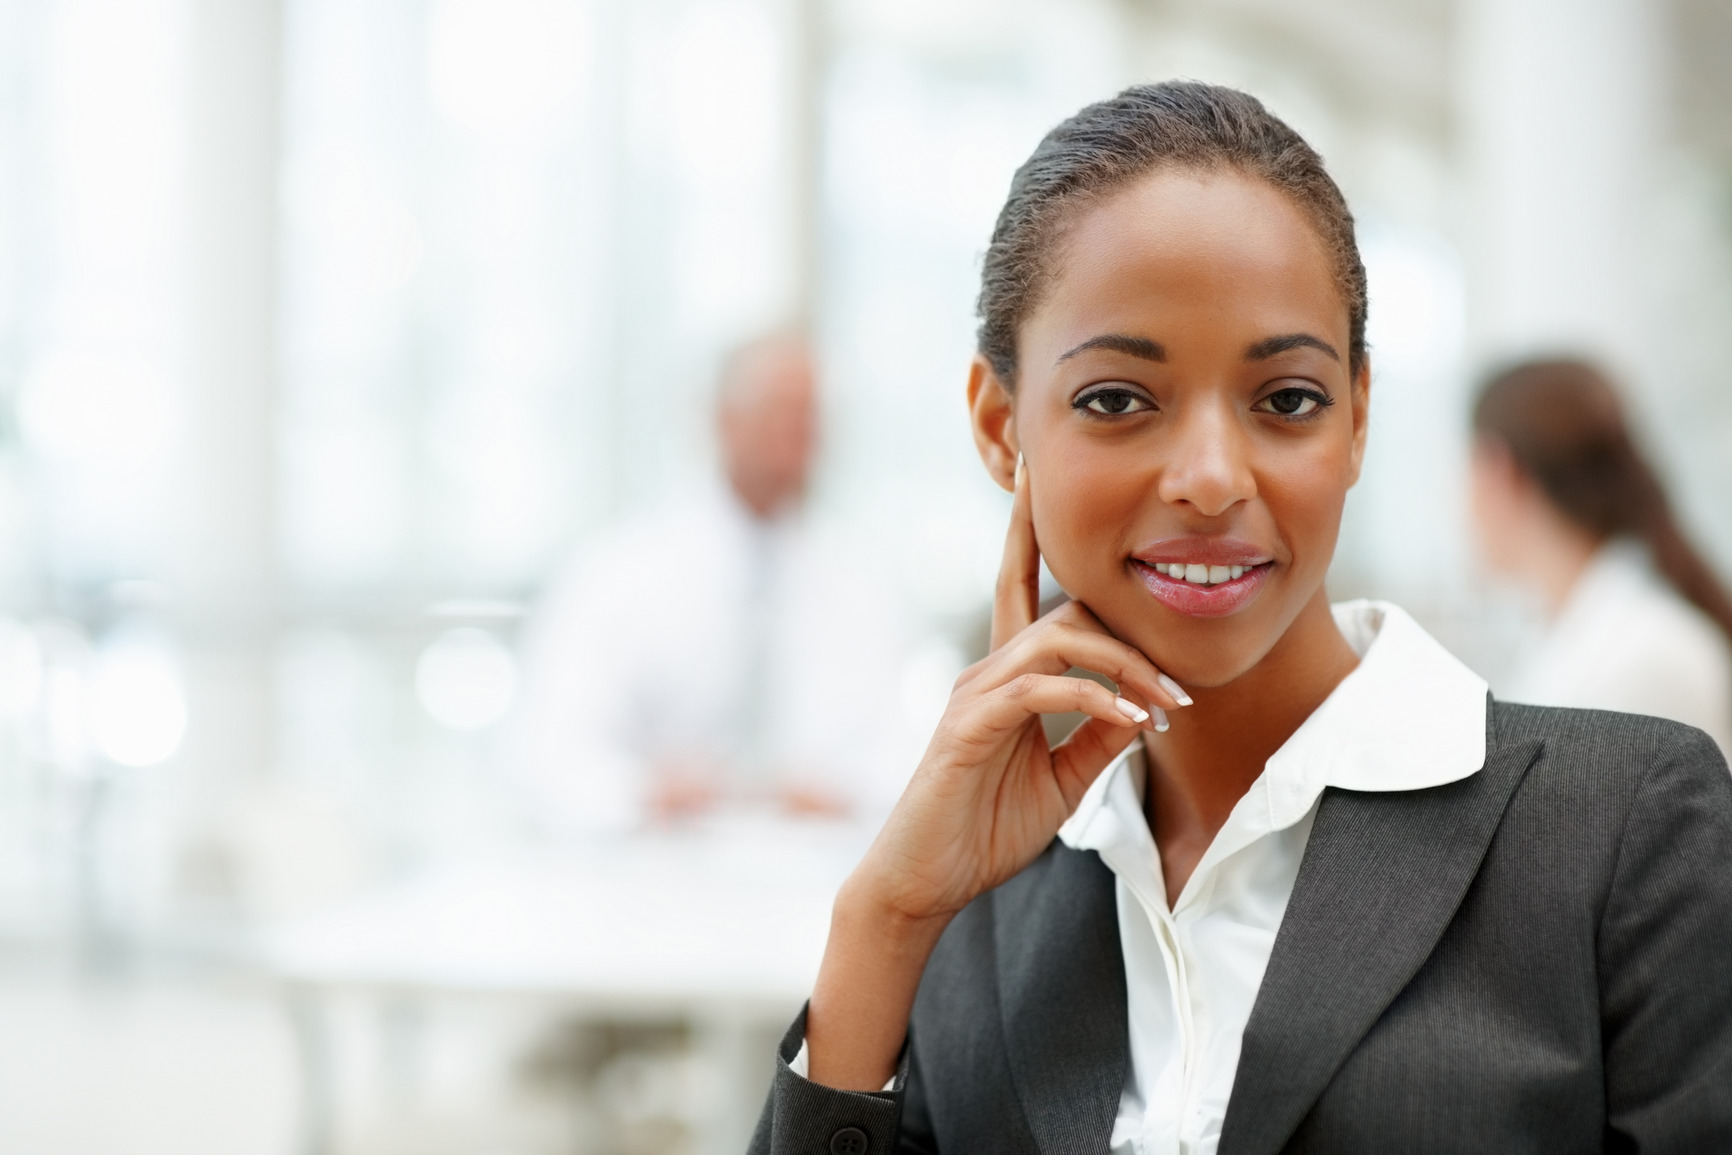 Portrait of an attractive African American business woman smiling confidently